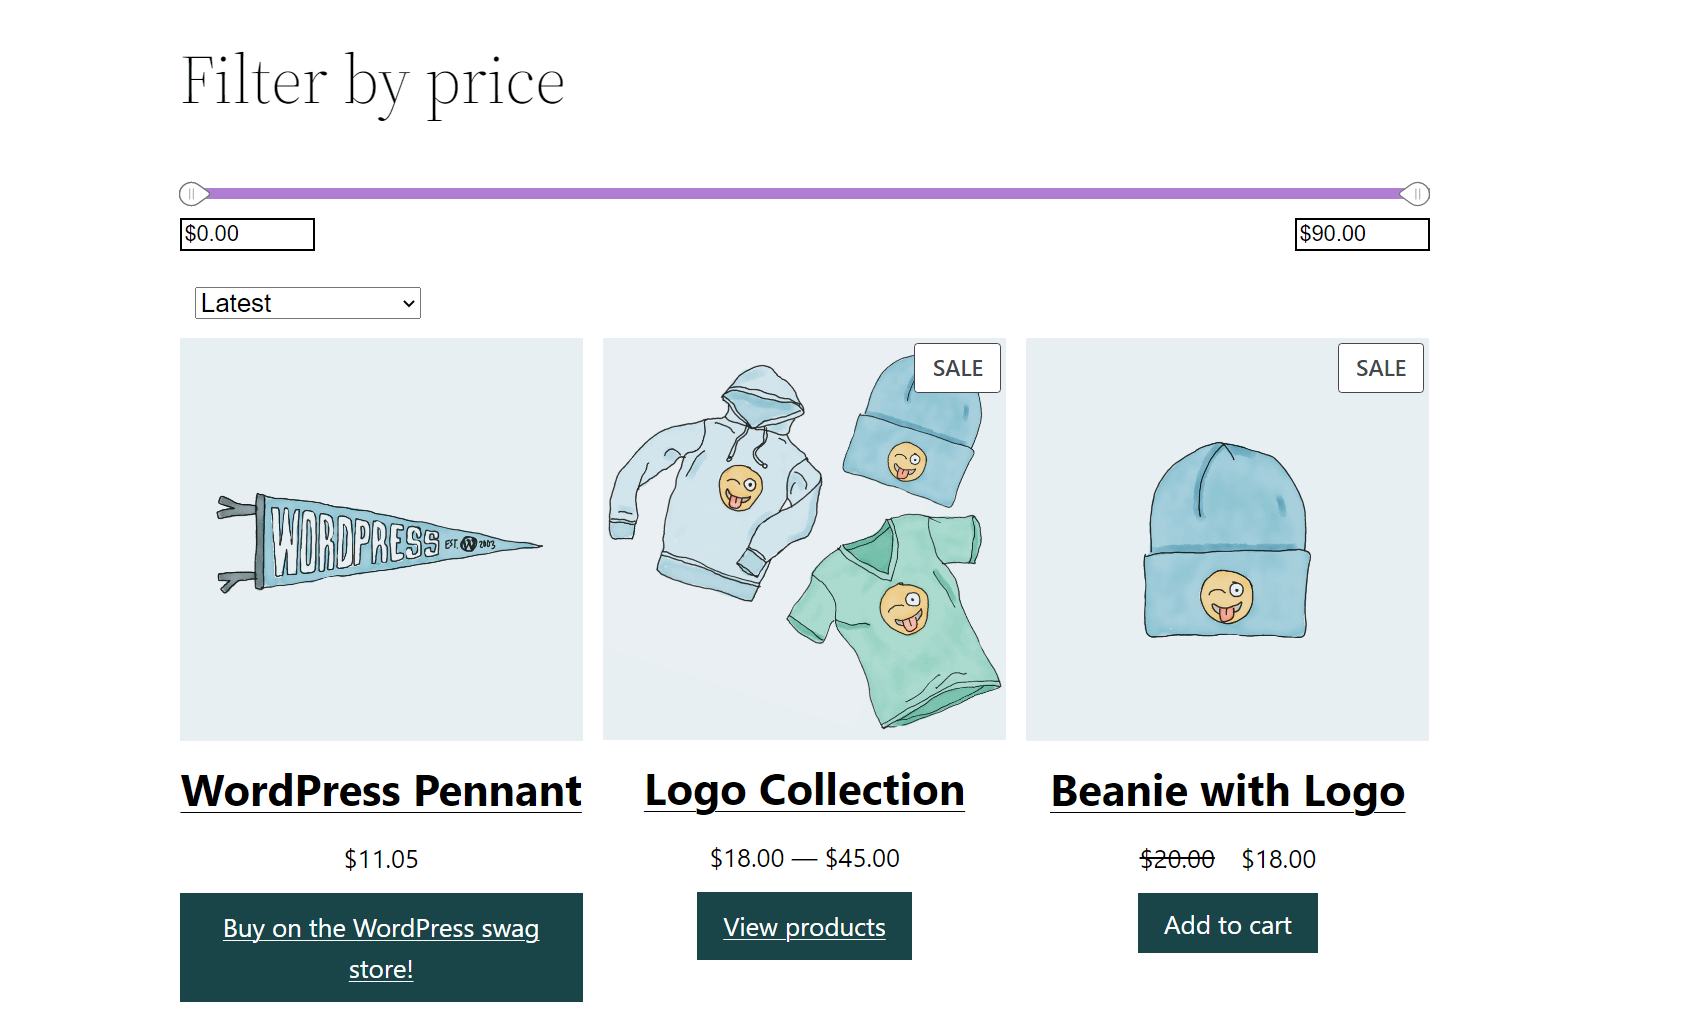 A WooCommerce shop page